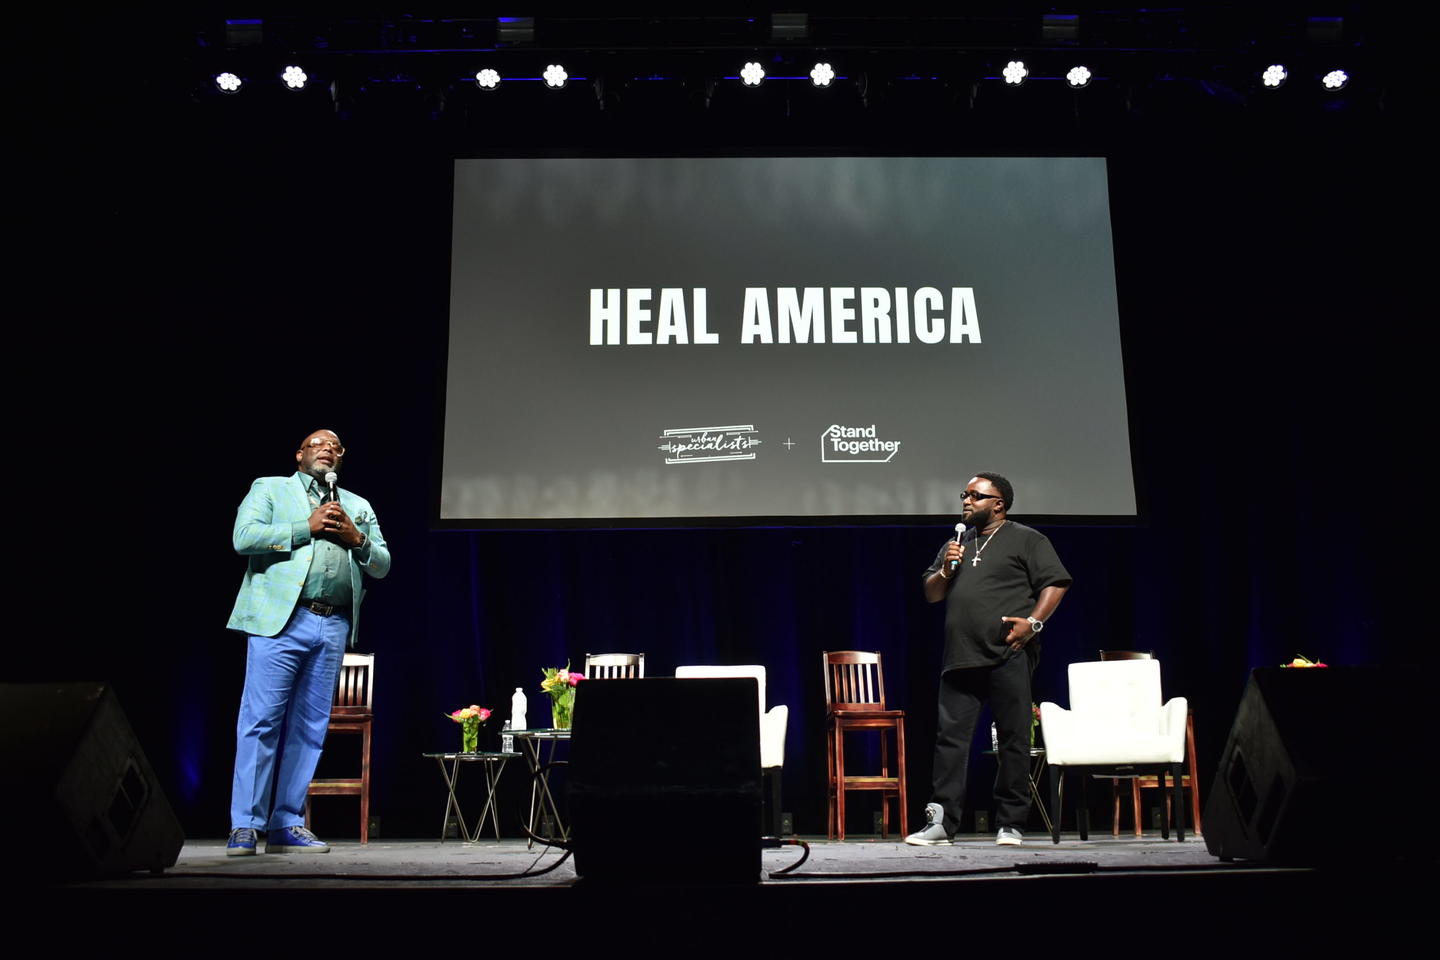 Two speakers on stage at a Heal America event